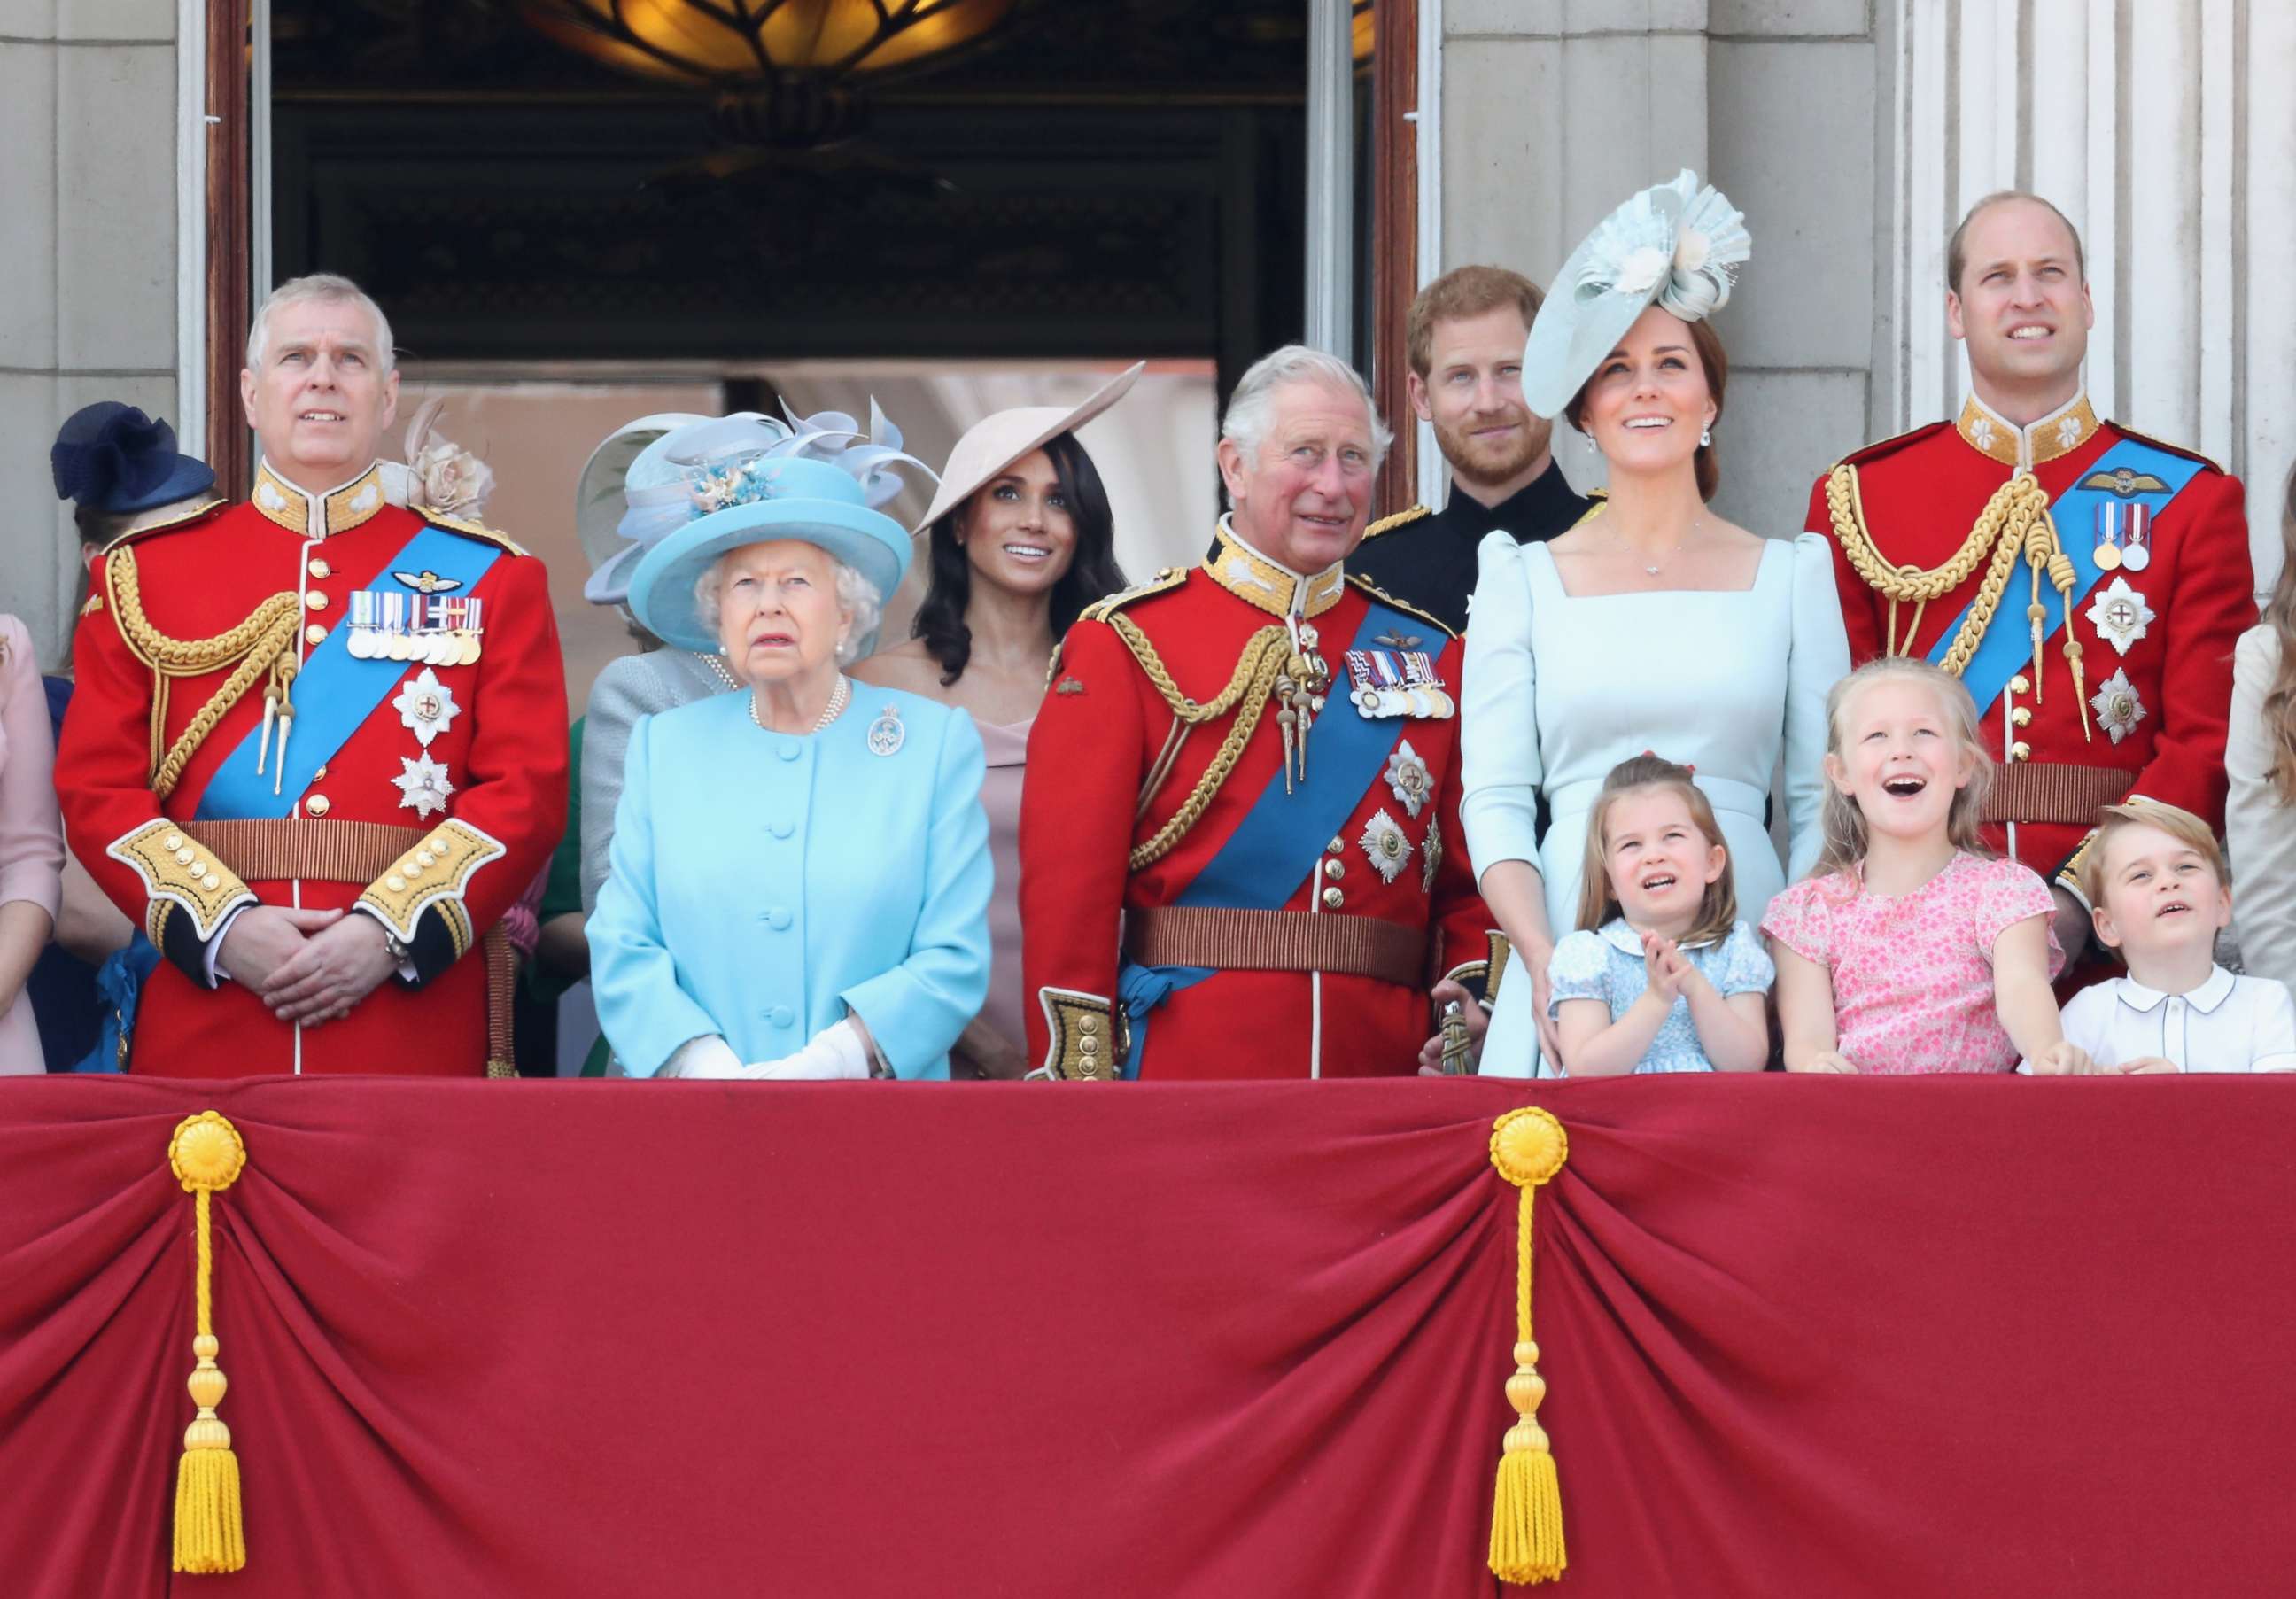 PHOTO: The royal family, including Queen Elizabeth II and Meghan, Duchess of Sussex, watch the flypast on the balcony of Buckingham Palace during Trooping The Colour on June 9, 2018 in London.